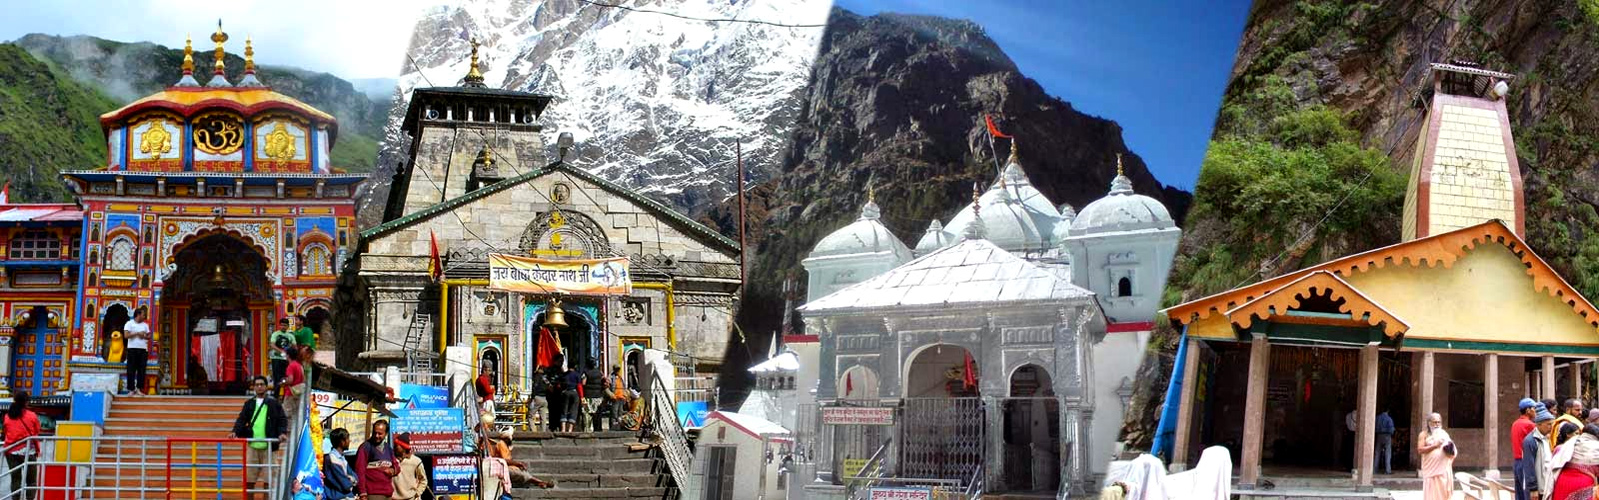 Char Dham Tour Package 2019